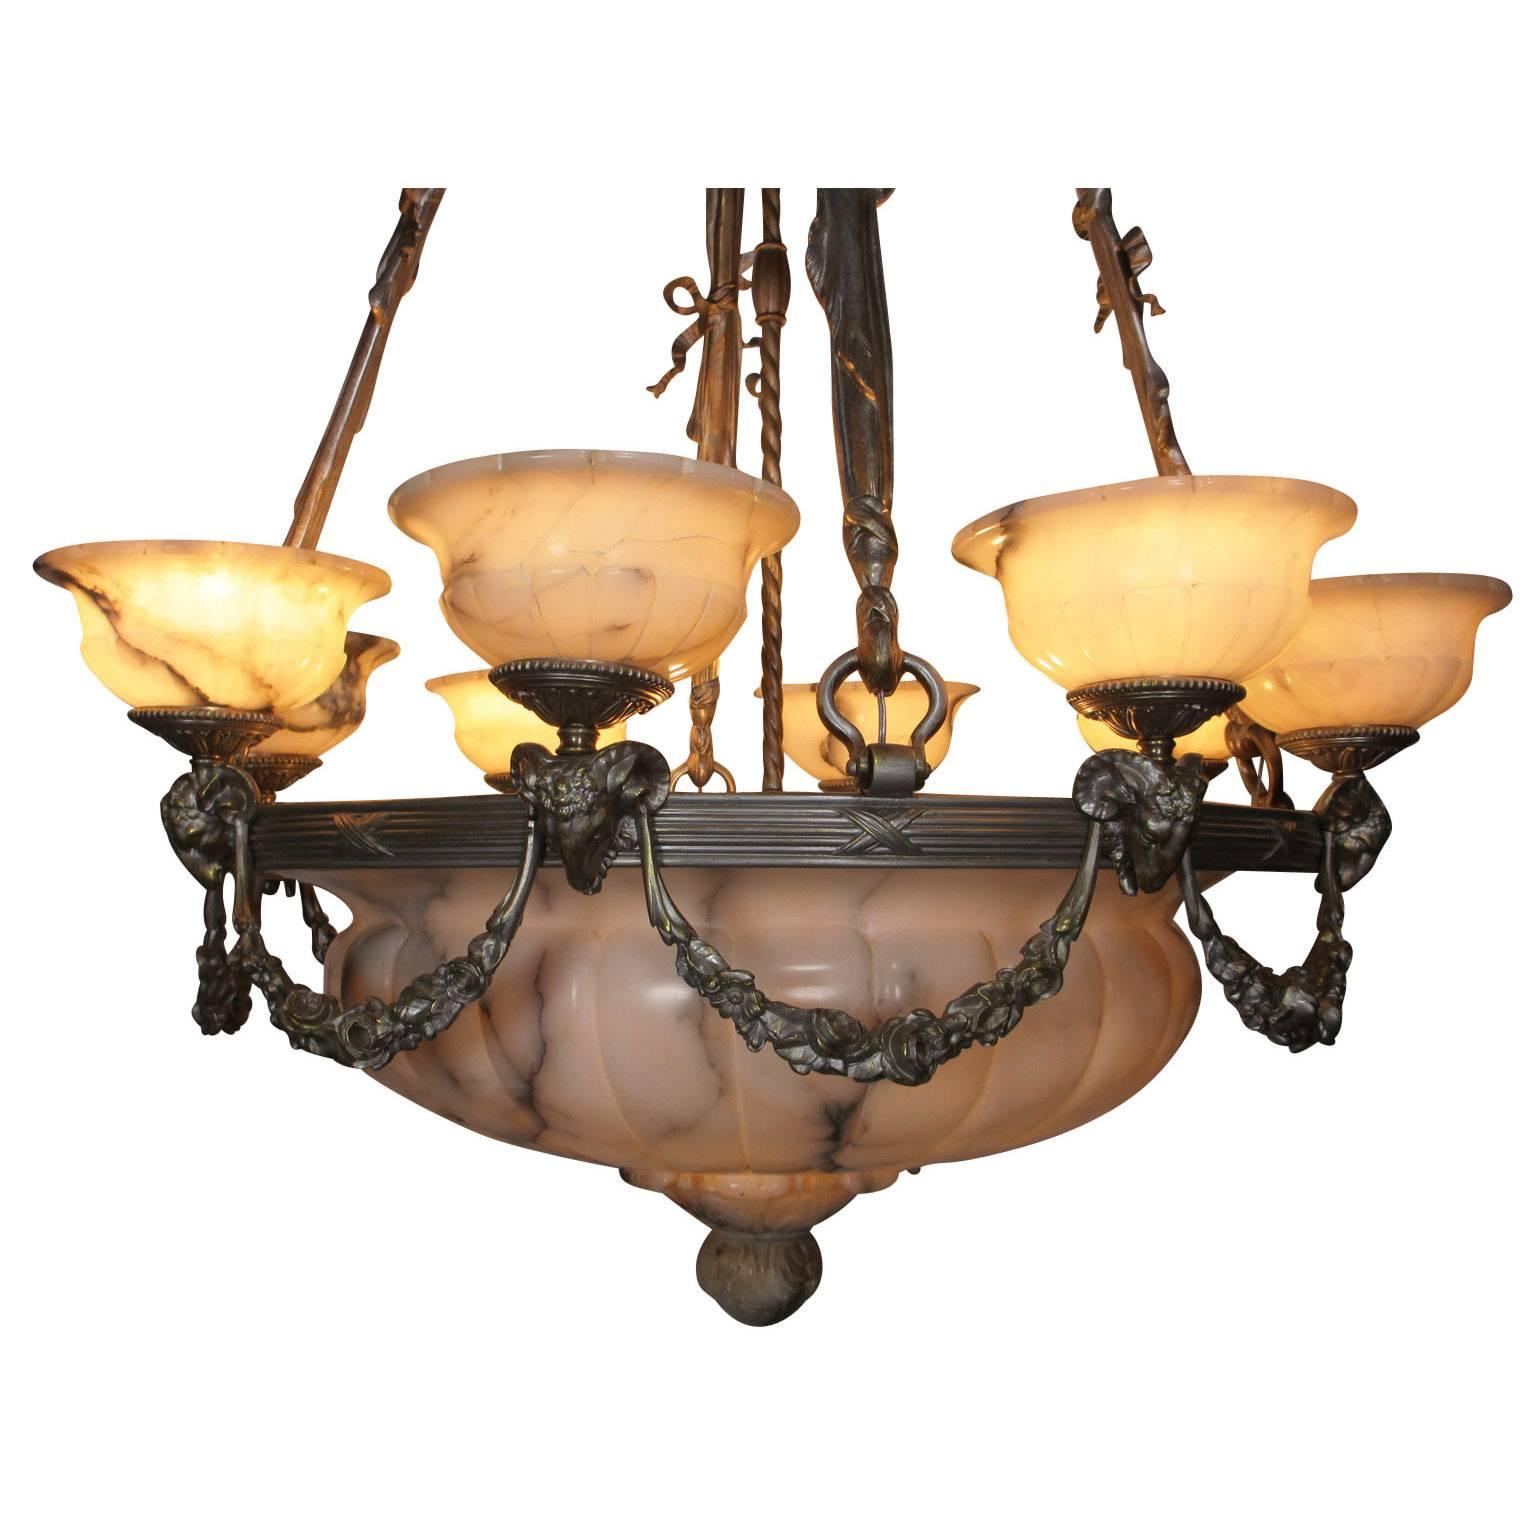 A large and rare early French 20th century Art Deco and silvered bronze carved veined cream alabaster eight-light figural chandelier. The impressive carved ovoid plafonnier with a carved finial mounted on a circular banded frame surmounted with